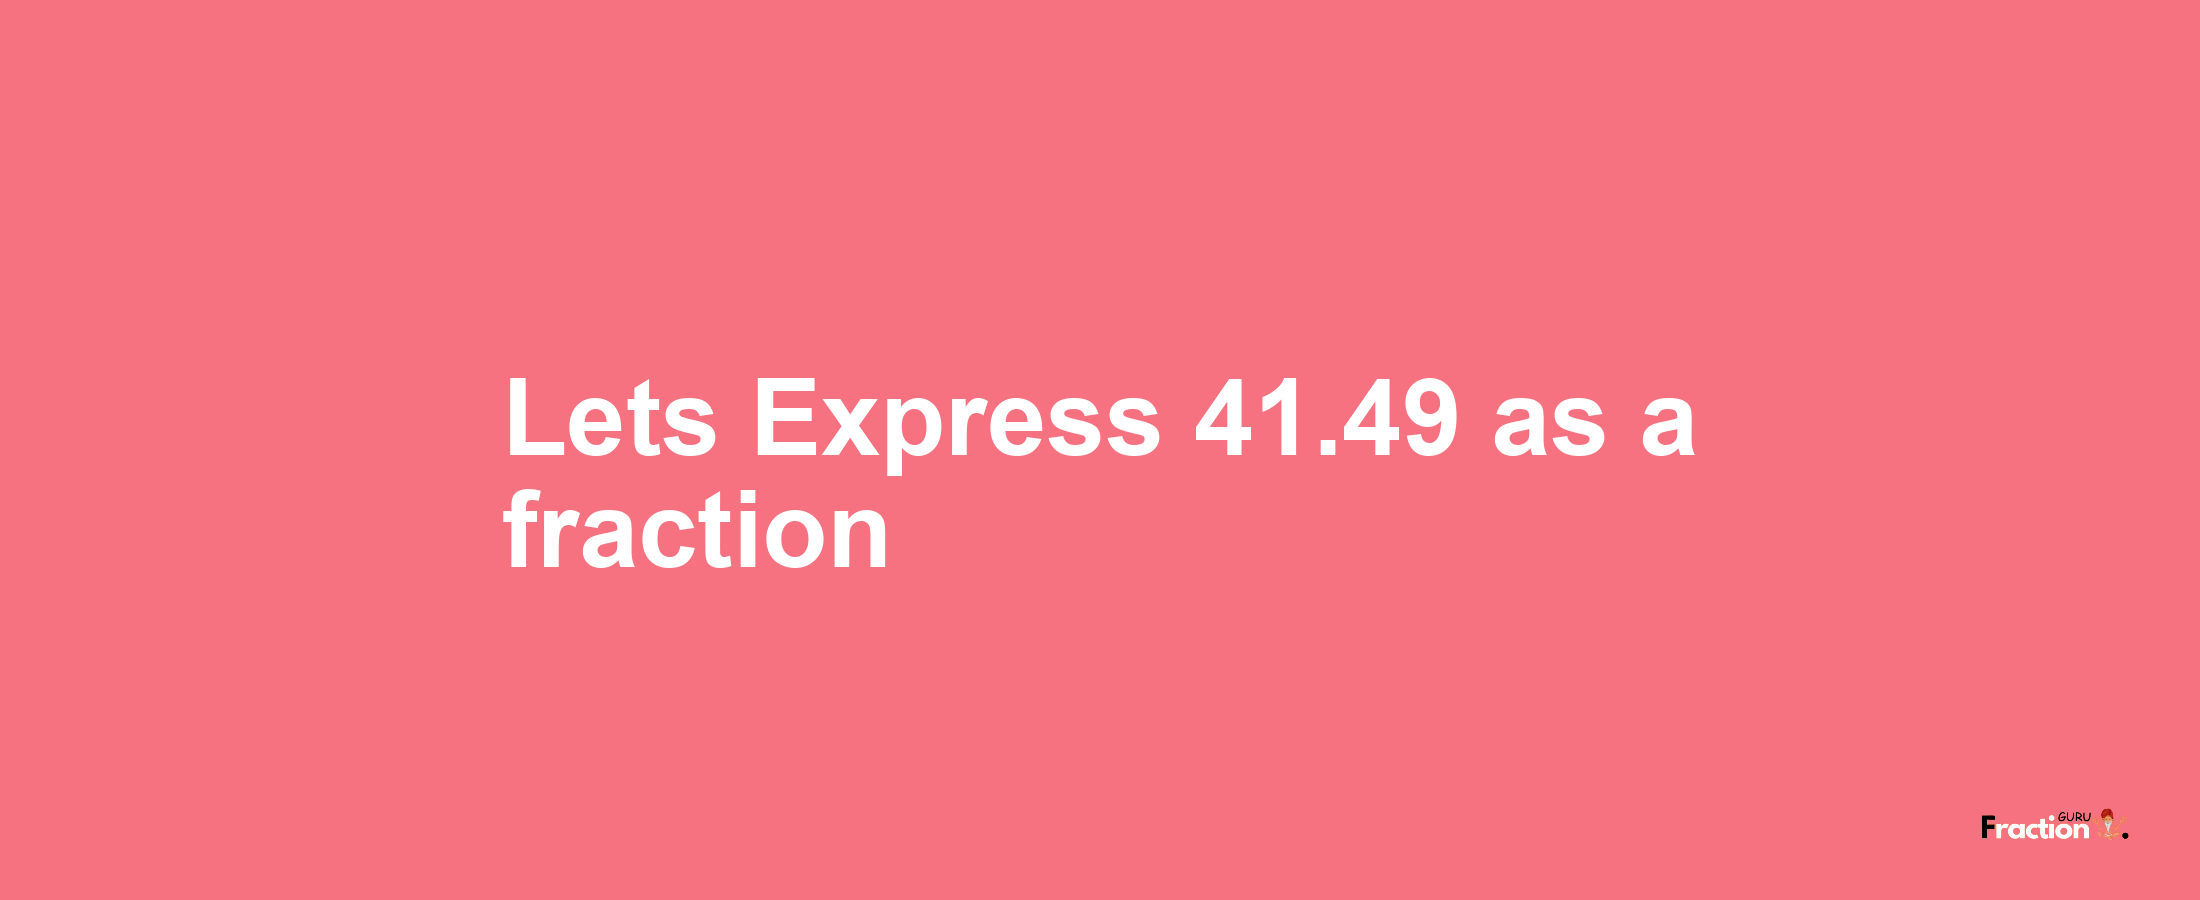 Lets Express 41.49 as afraction